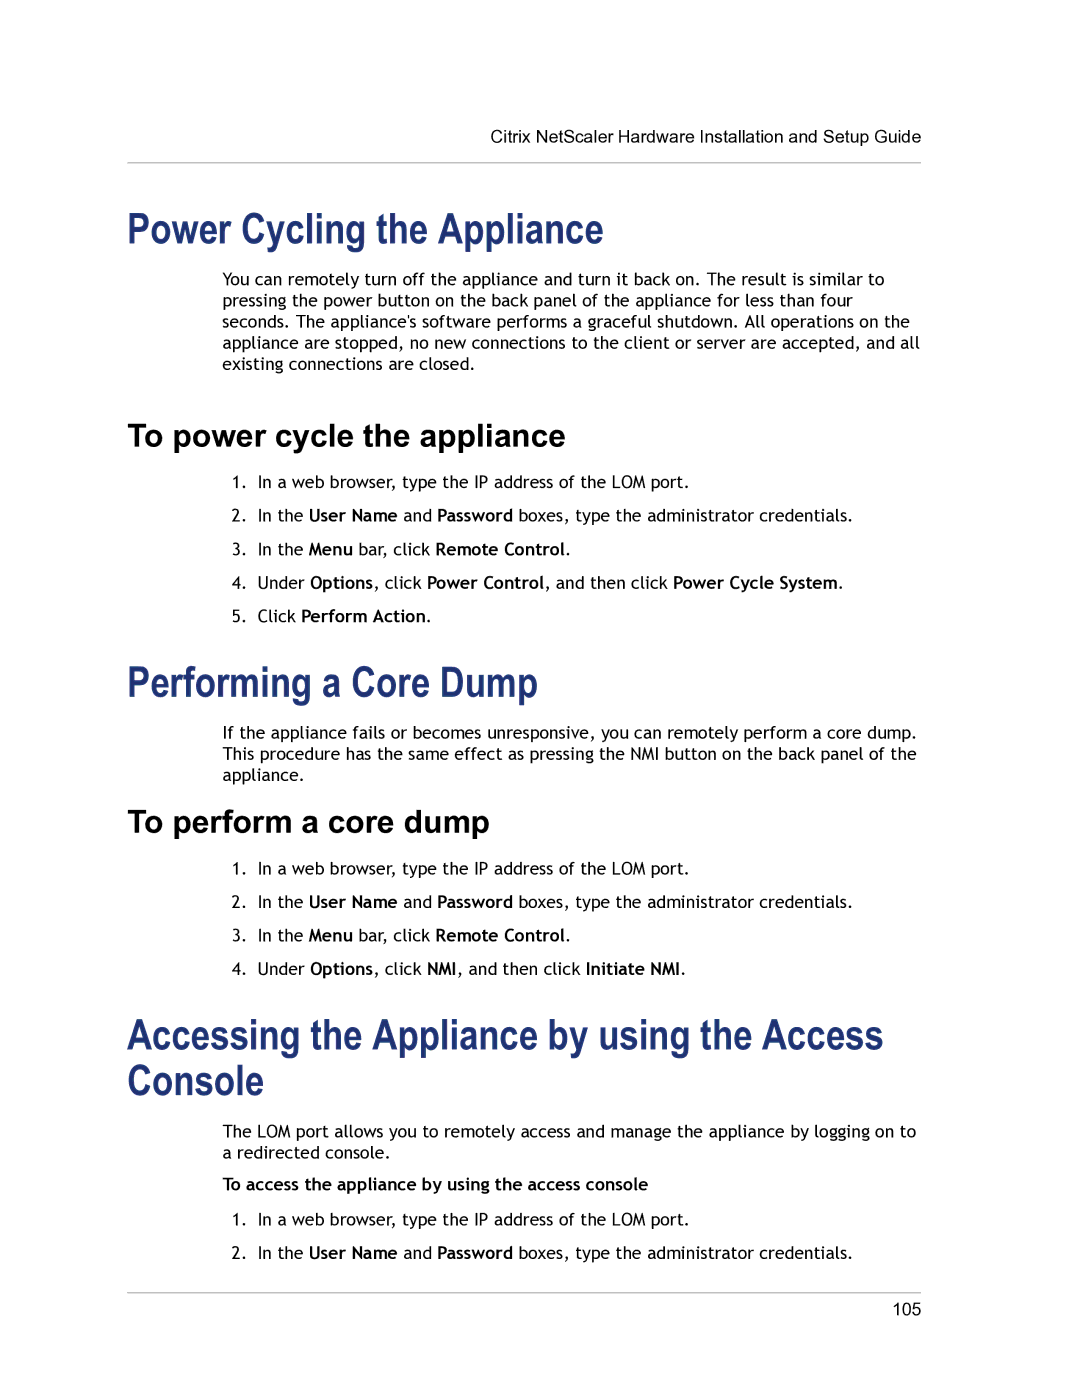 Citrix Systems 9.3 setup guide Power Cycling the Appliance, Performing a Core Dump, To power cycle the appliance 